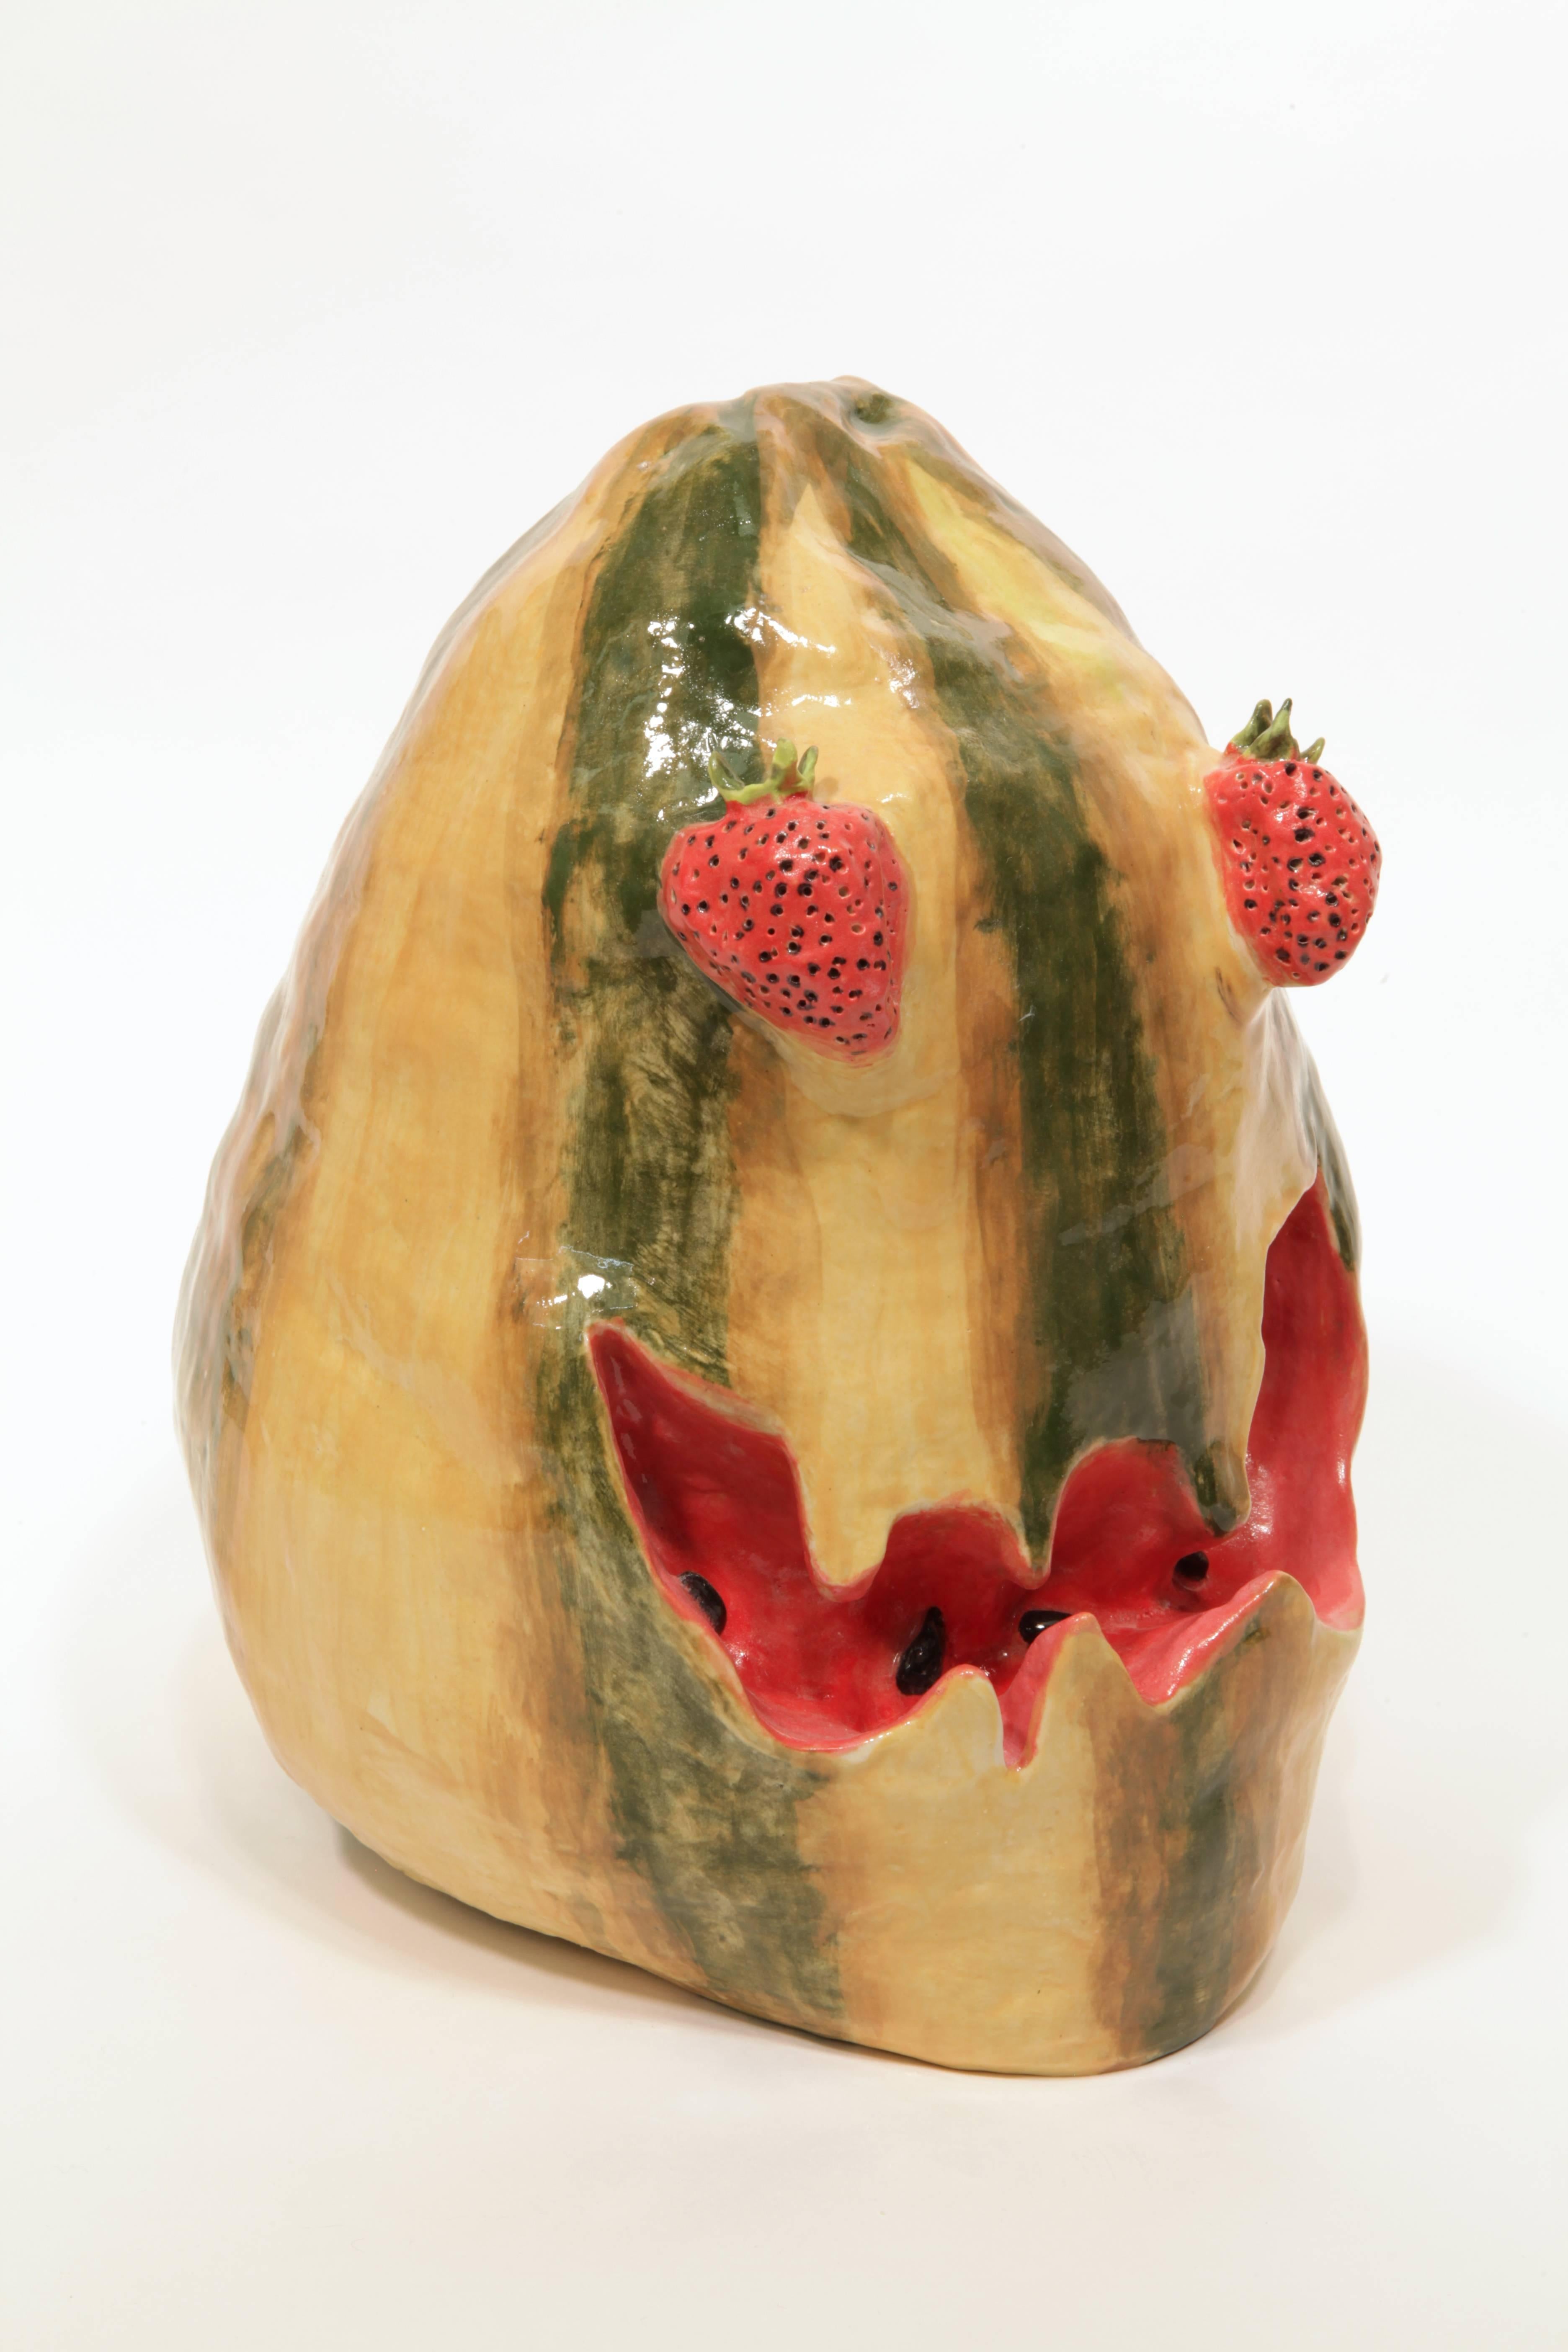 Watermelon Head with Strawberry Eyes - Sculpture by Valerie Hegarty